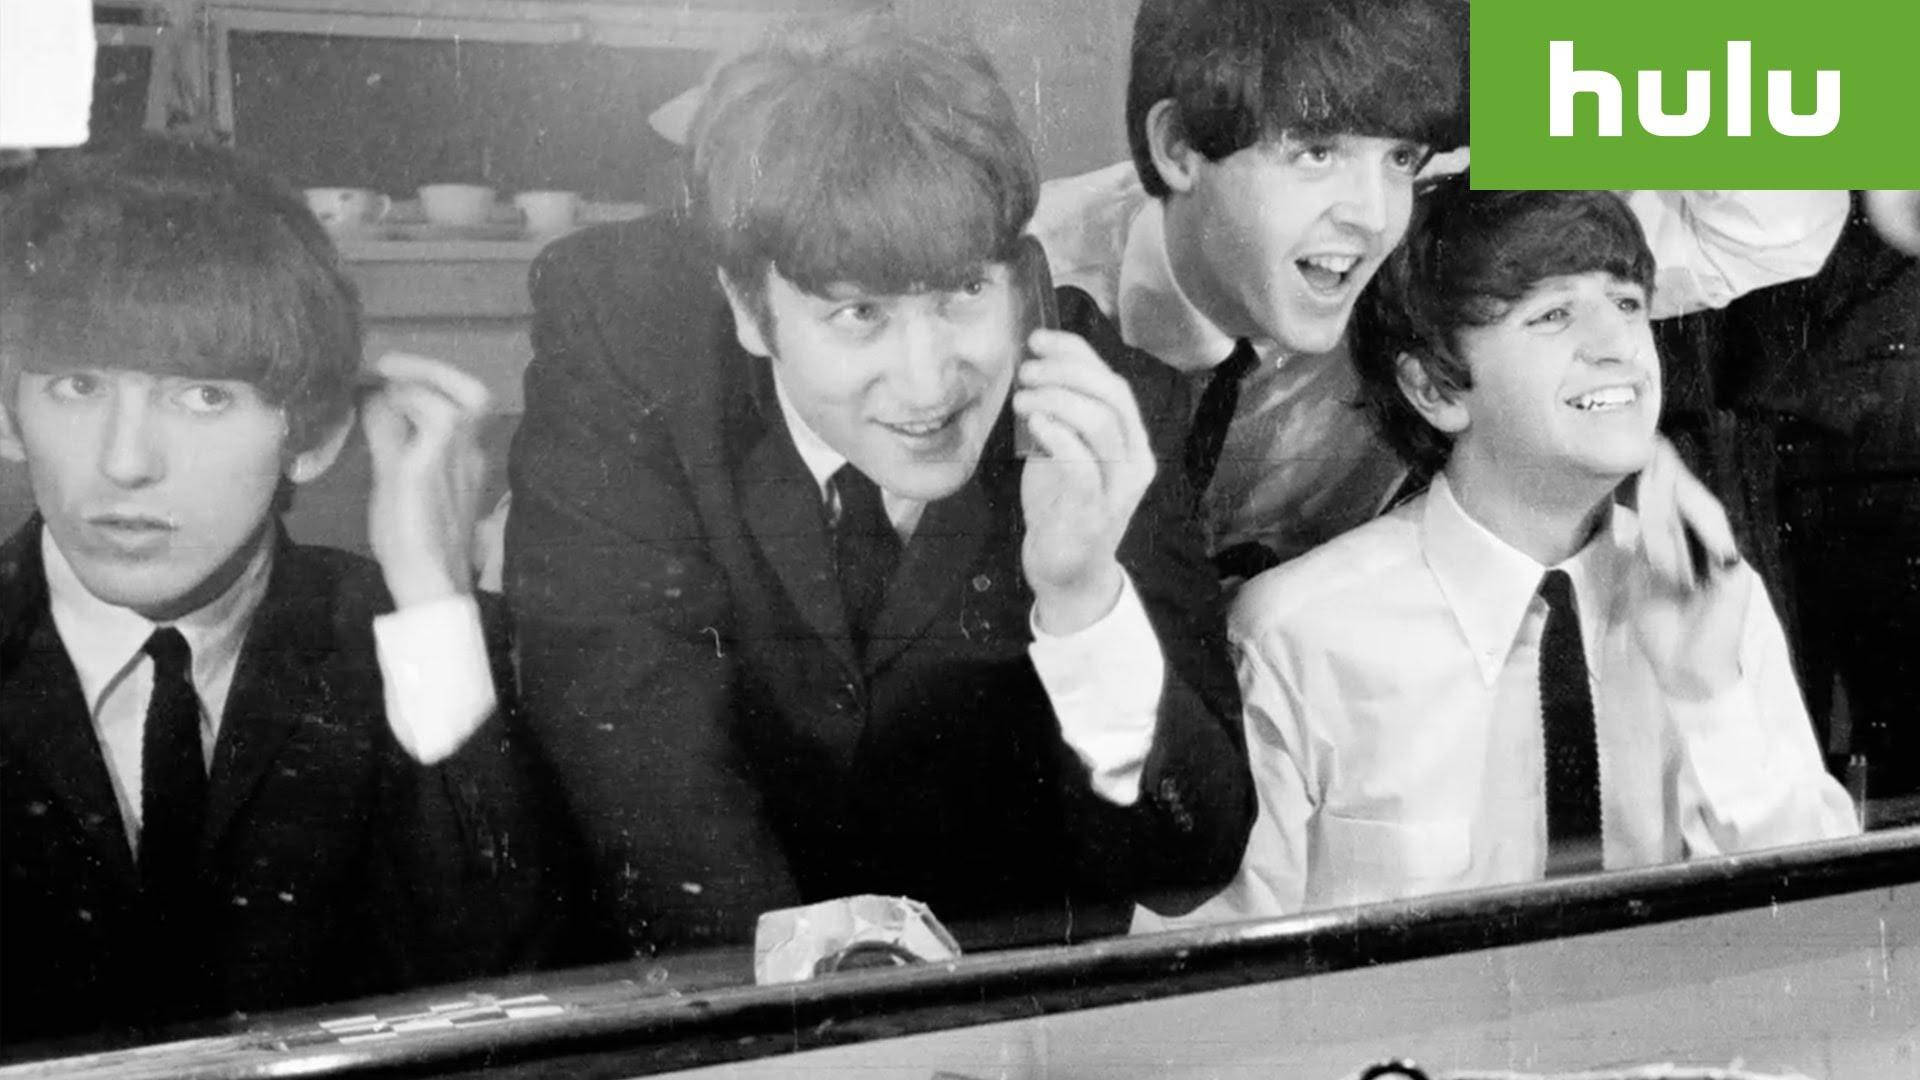 The Beatles In Hulu Background